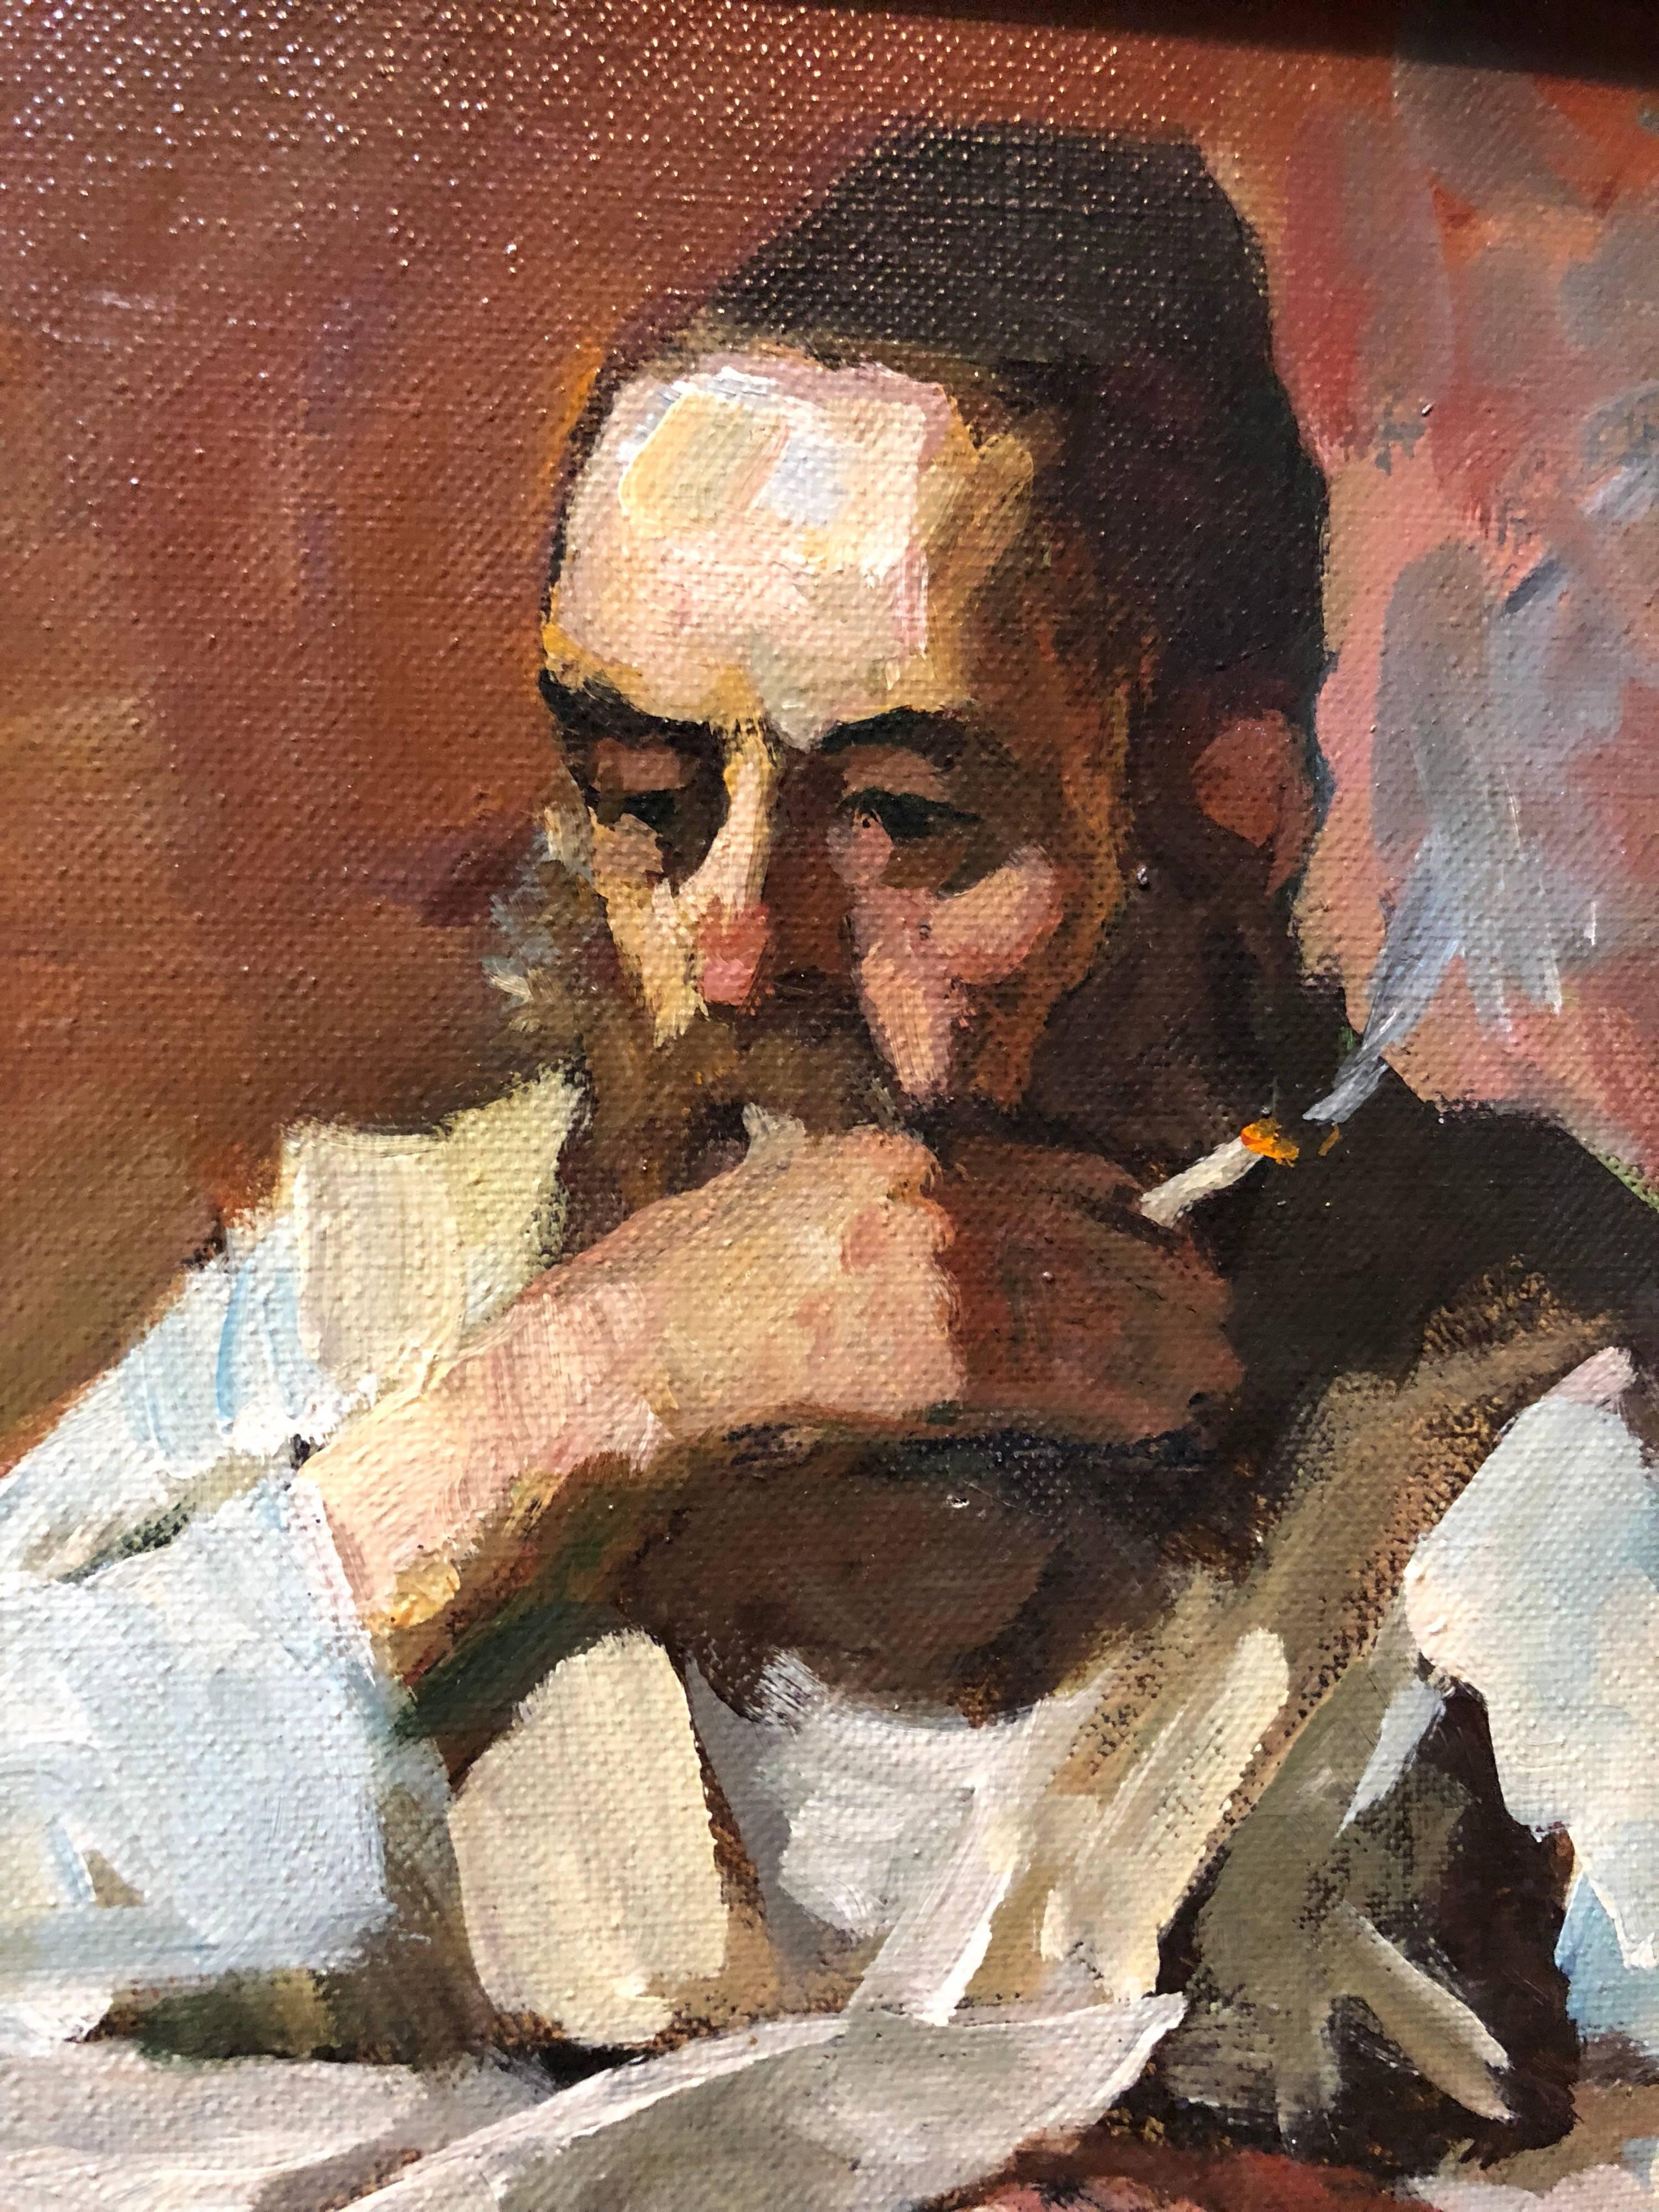 Israeli Judaica Rabbi Studying Expressionist Oil Painting - Brown Figurative Painting by Adolf Adler